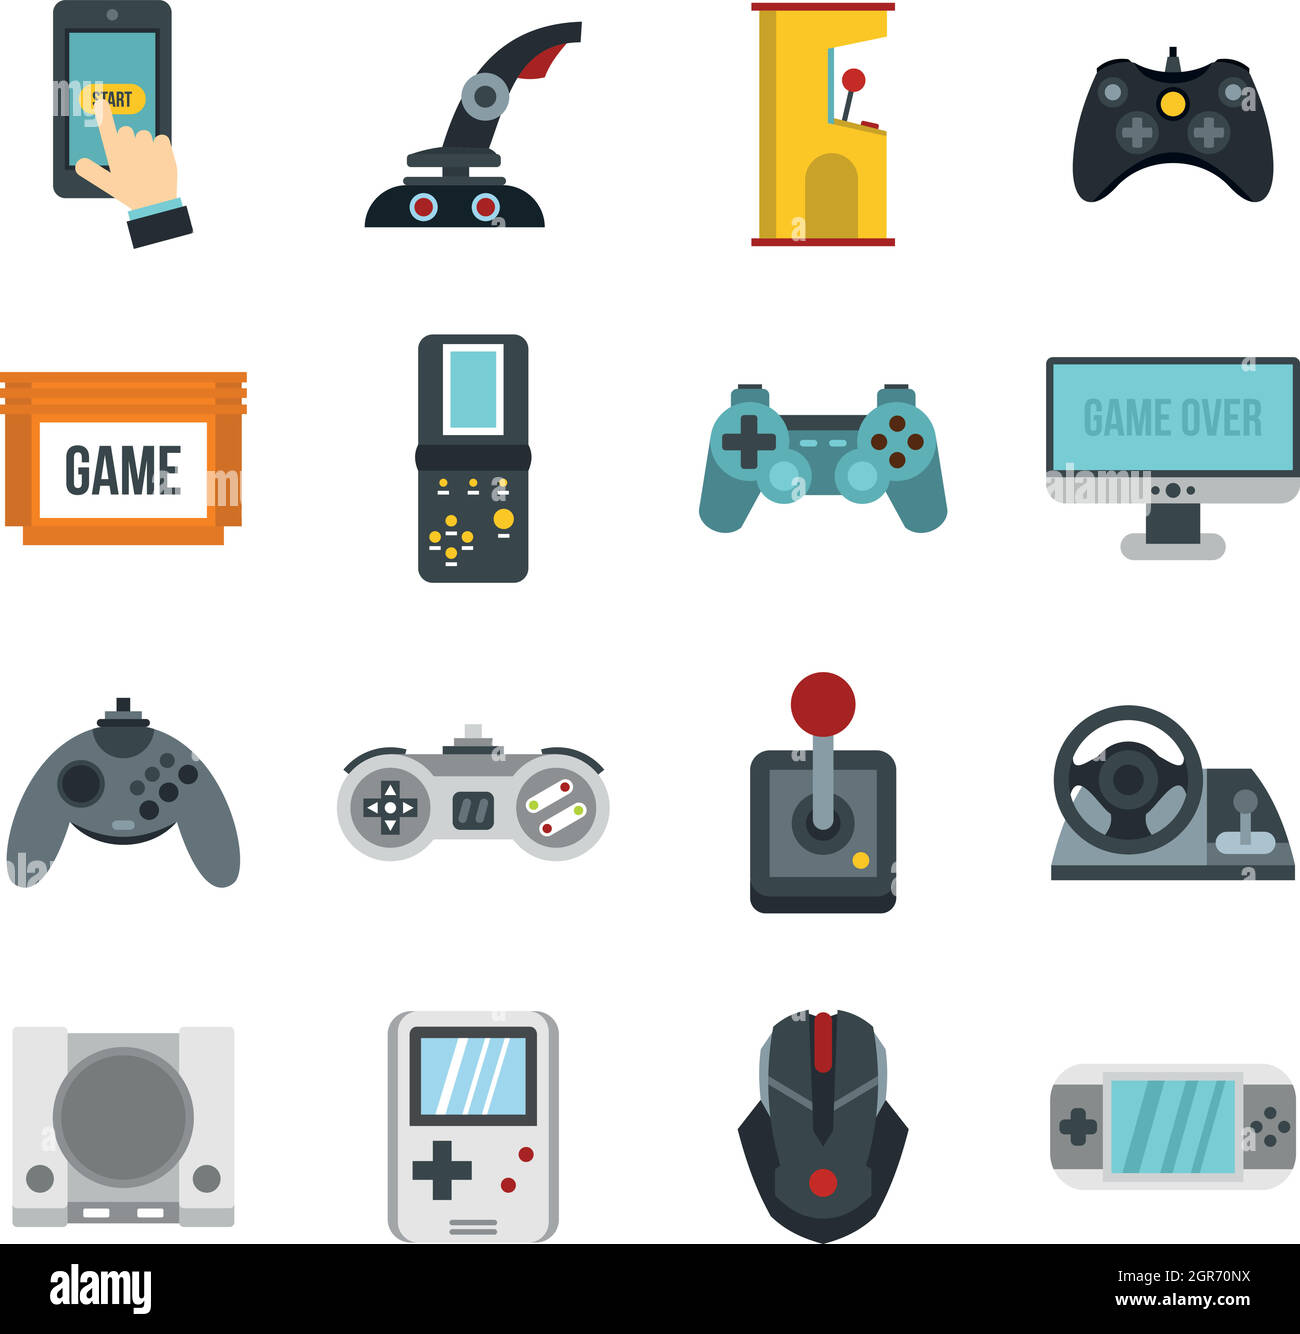 Video game icons set, flat style Stock Vector